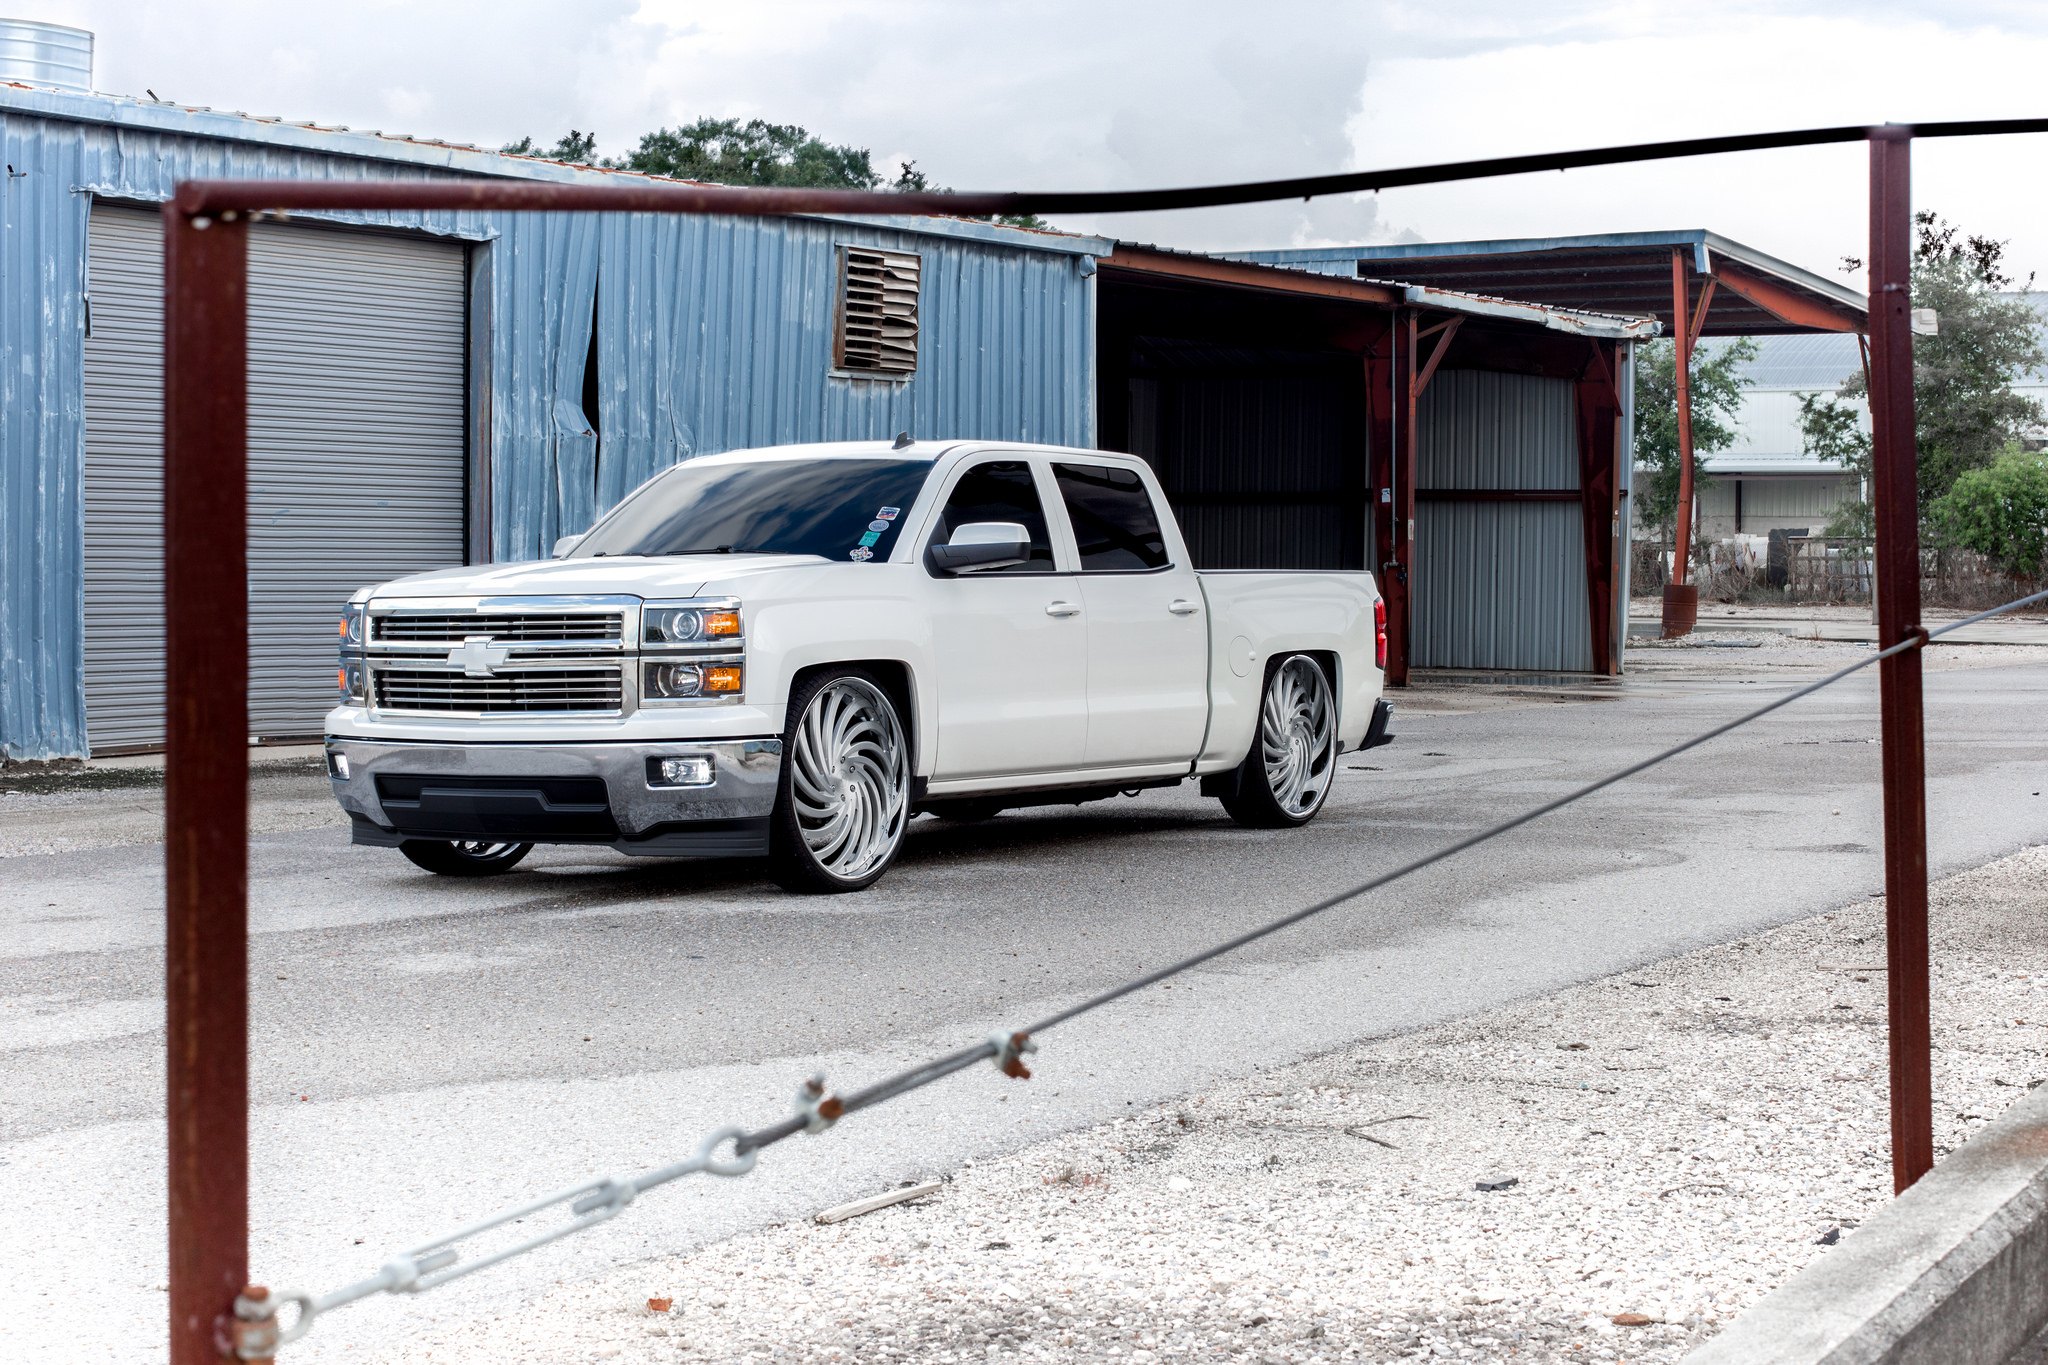 White Chevy Silverado with Aftermarket Projector Headlights - Photo by Dub Wheels